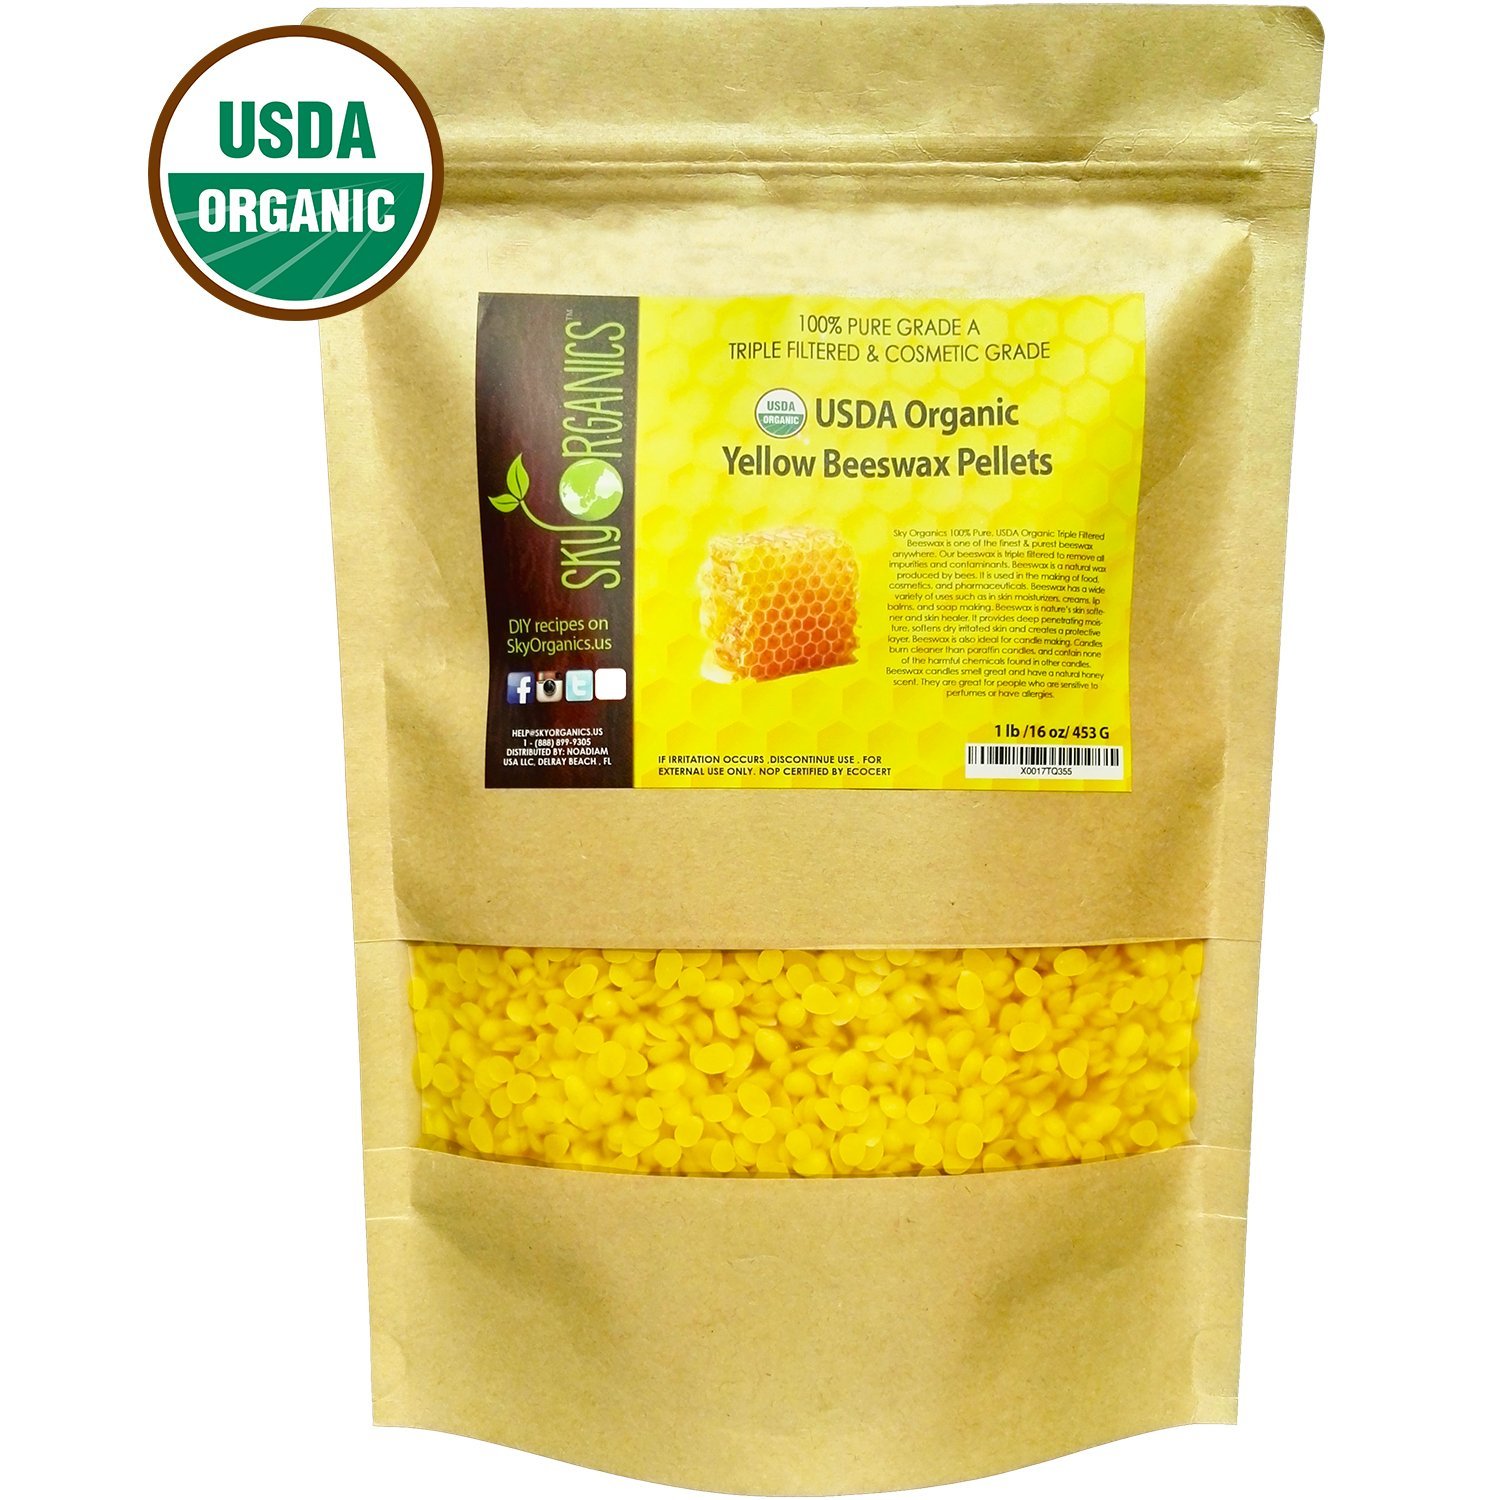 US Organic Beeswax Yellow Pastille, 100% Pure Certified USDA